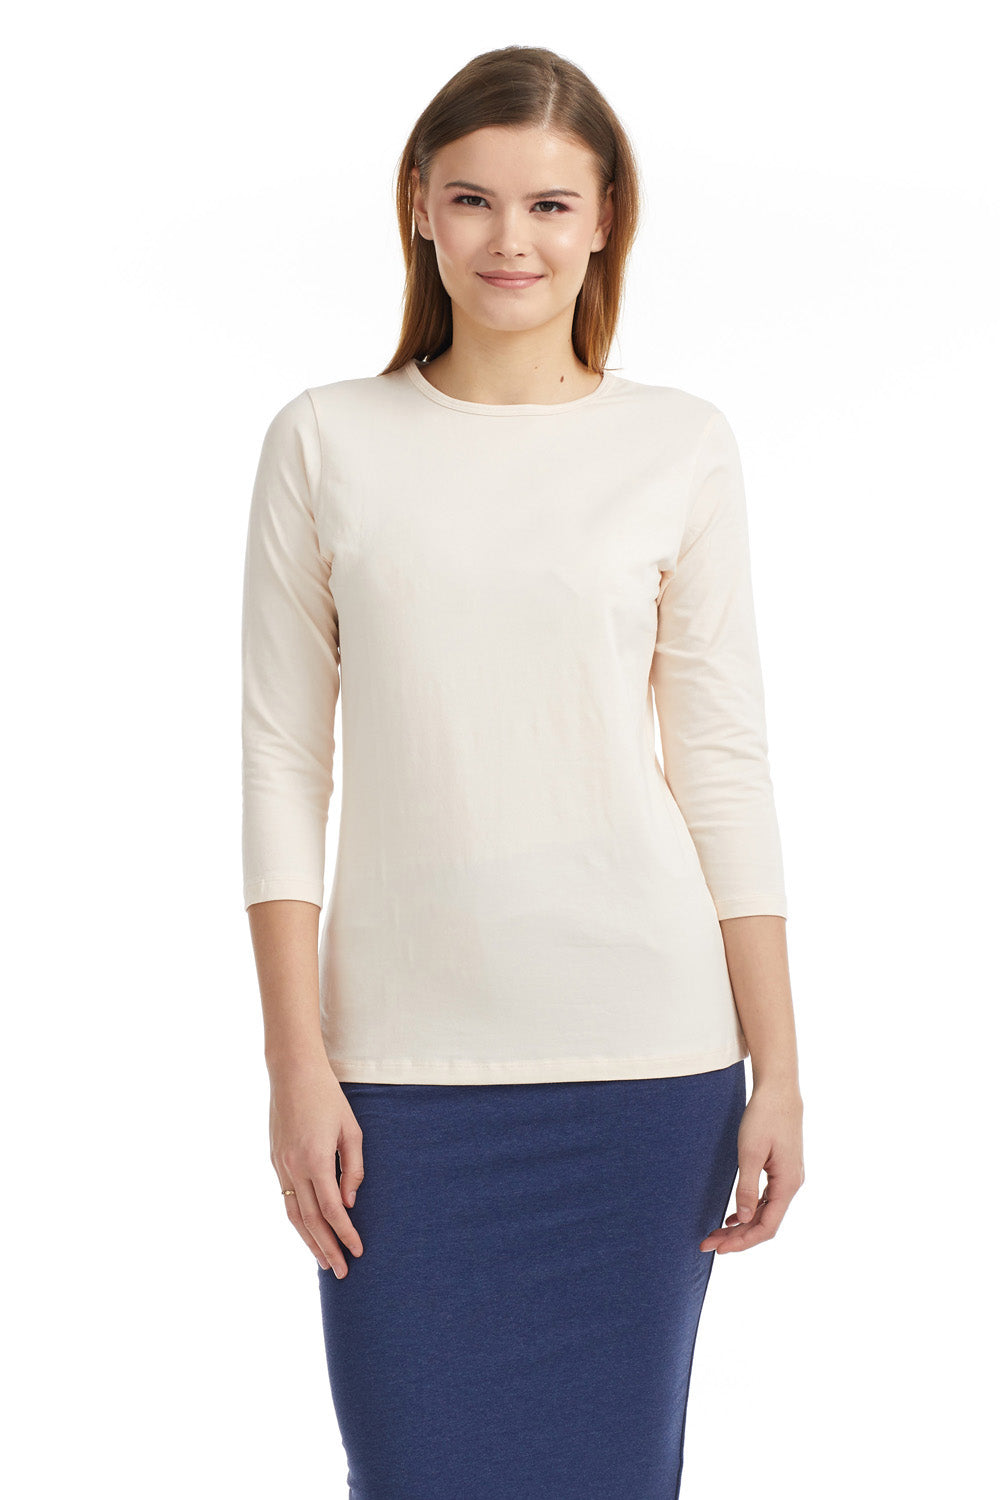 stretchy loose fitting cotton layering shirt 